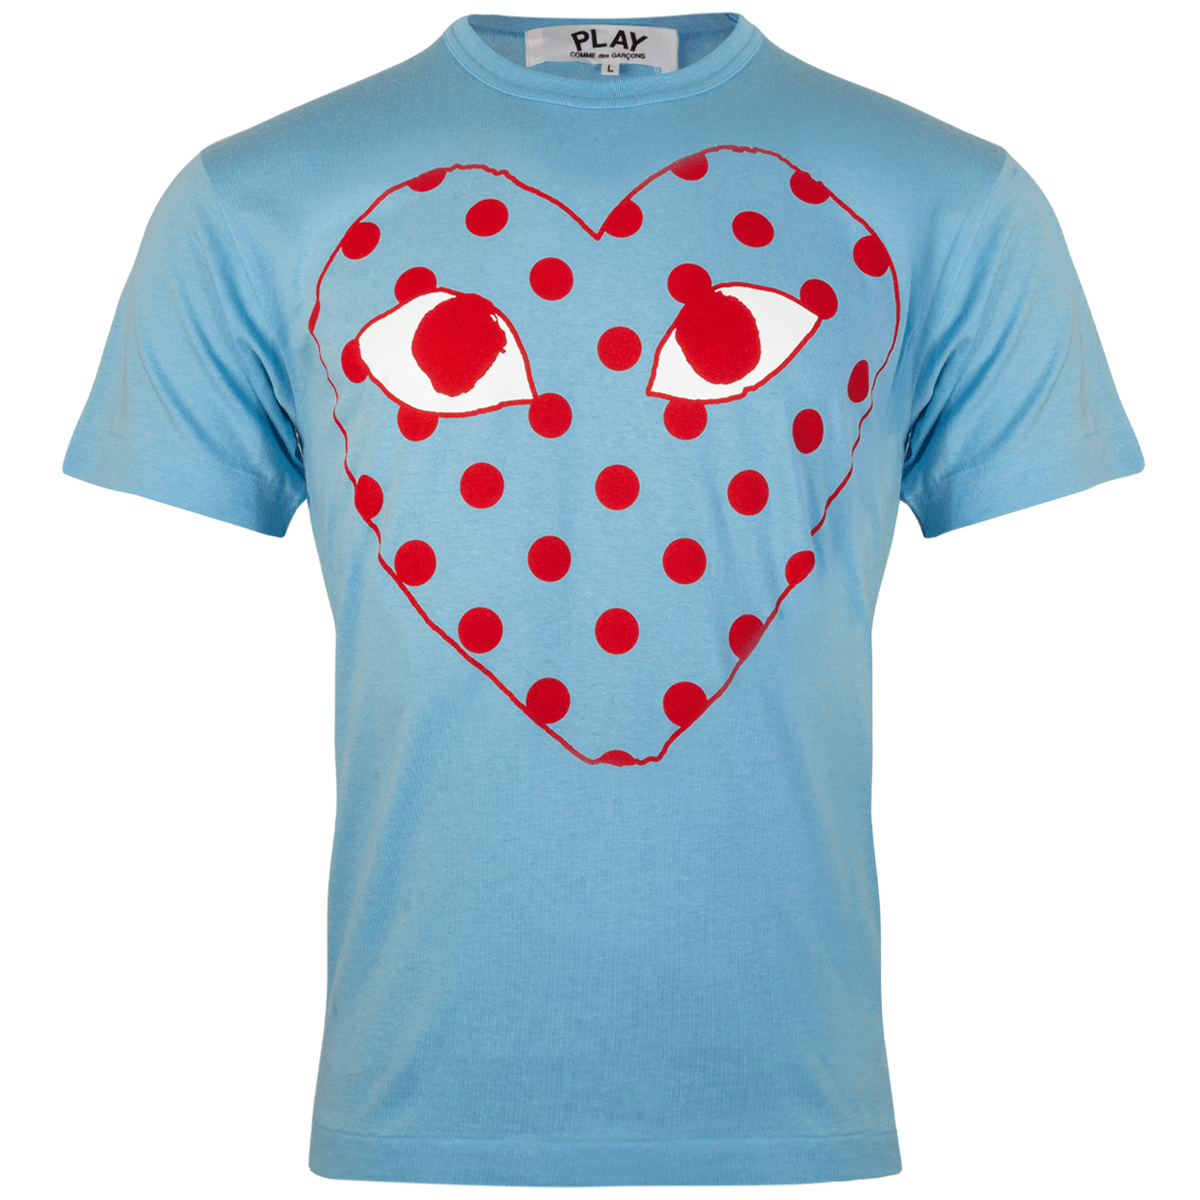 T276 Bright Spotted Heart Logo T-shirt Blue M Blue